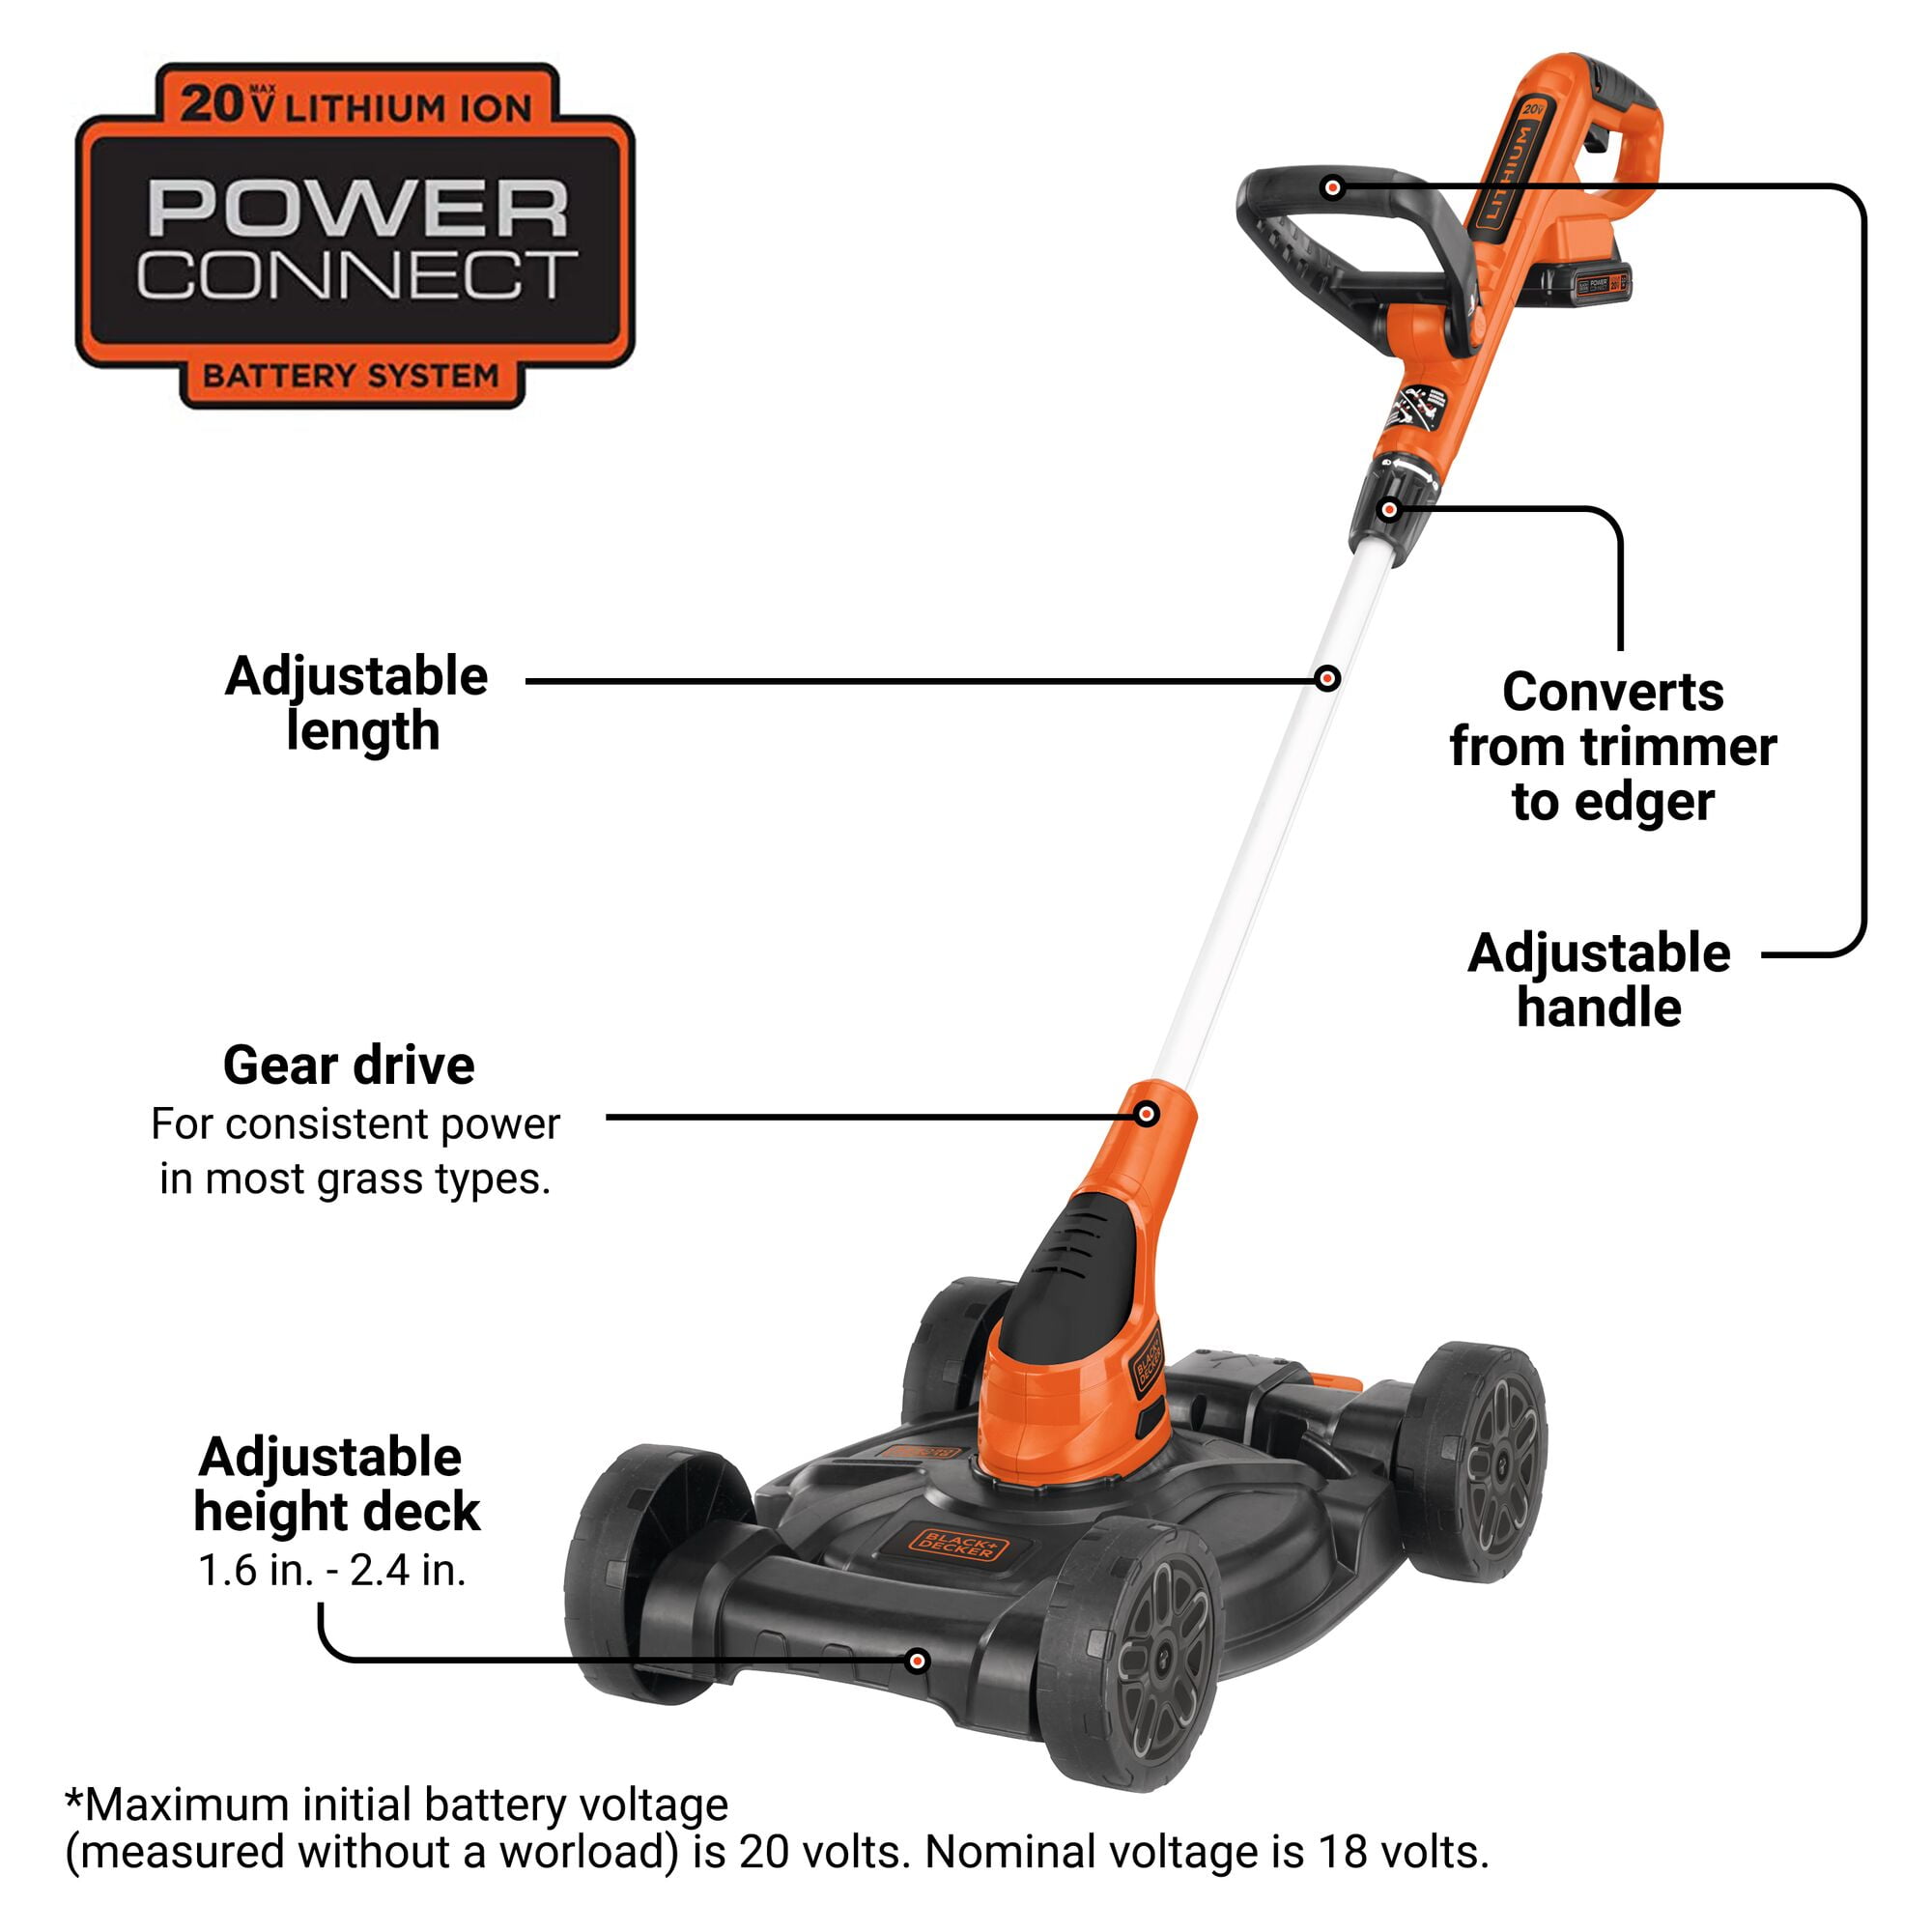 Black+decker MTE912 6.5-Amp Electric 3-in-1 Trimmer/Edger and Mower 12 New